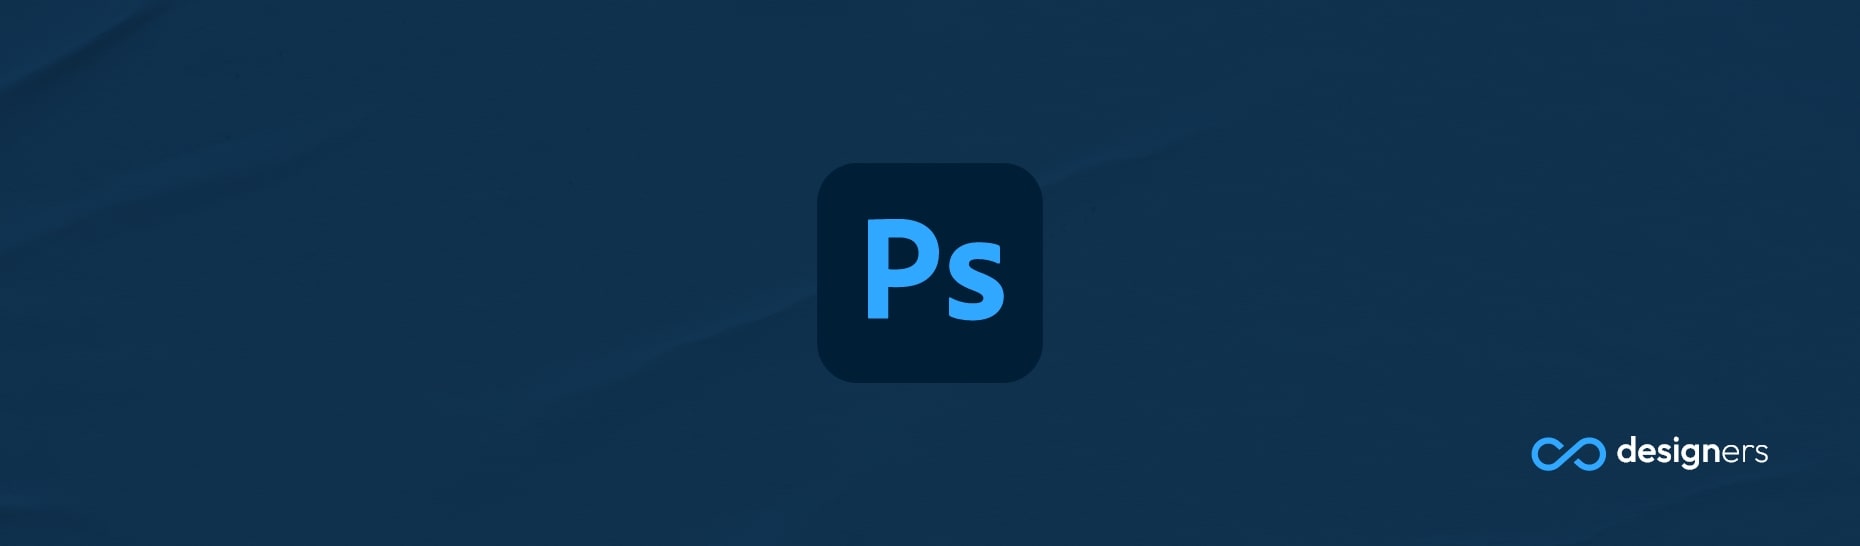 How Do I Stretch an Image in Photoshop Without Distorting It?